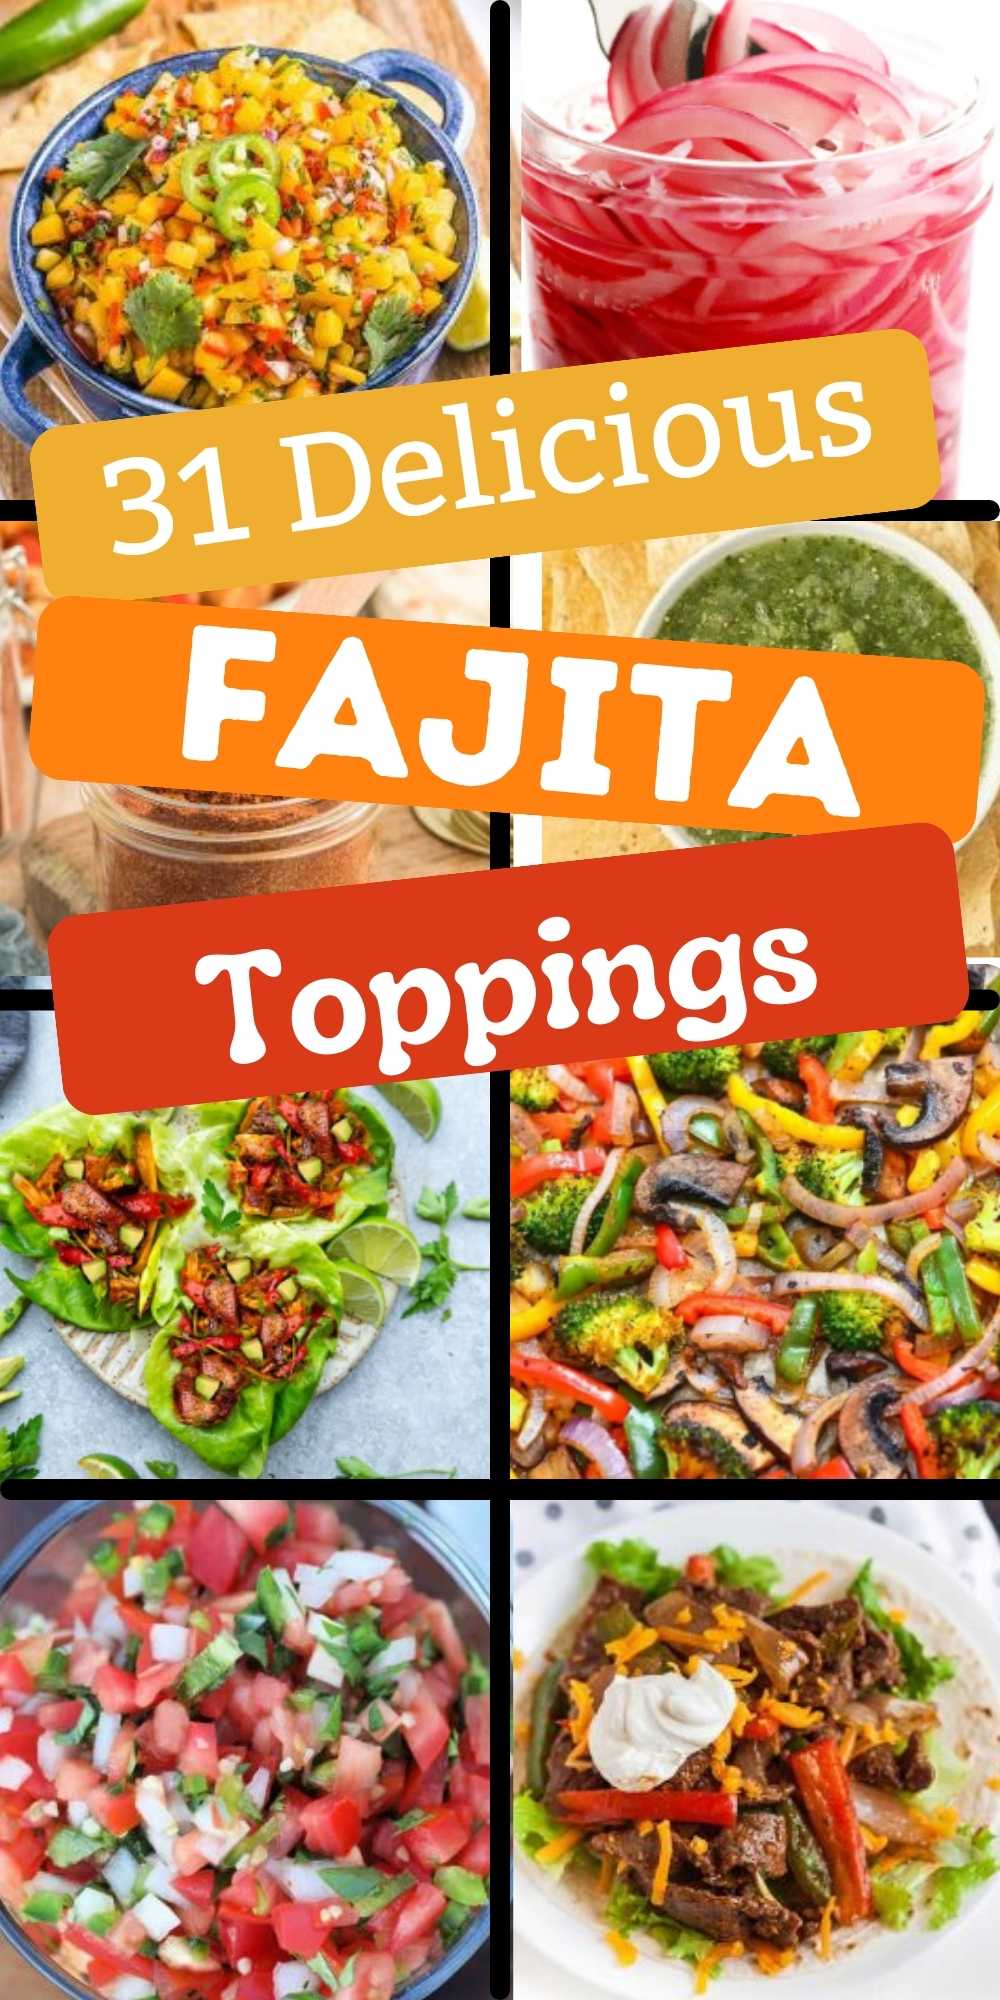 Create the most delicious fajita meal with these fajita toppings that come together easily. We’ve rounded up the 31 best toppings for fajitas for an amazing meal. Delicious toppings for chicken, steak, stove top fajitas, flat top fajitas, low carb and chicken fajitas stove top. #eatingonadime #fajitatoppings 